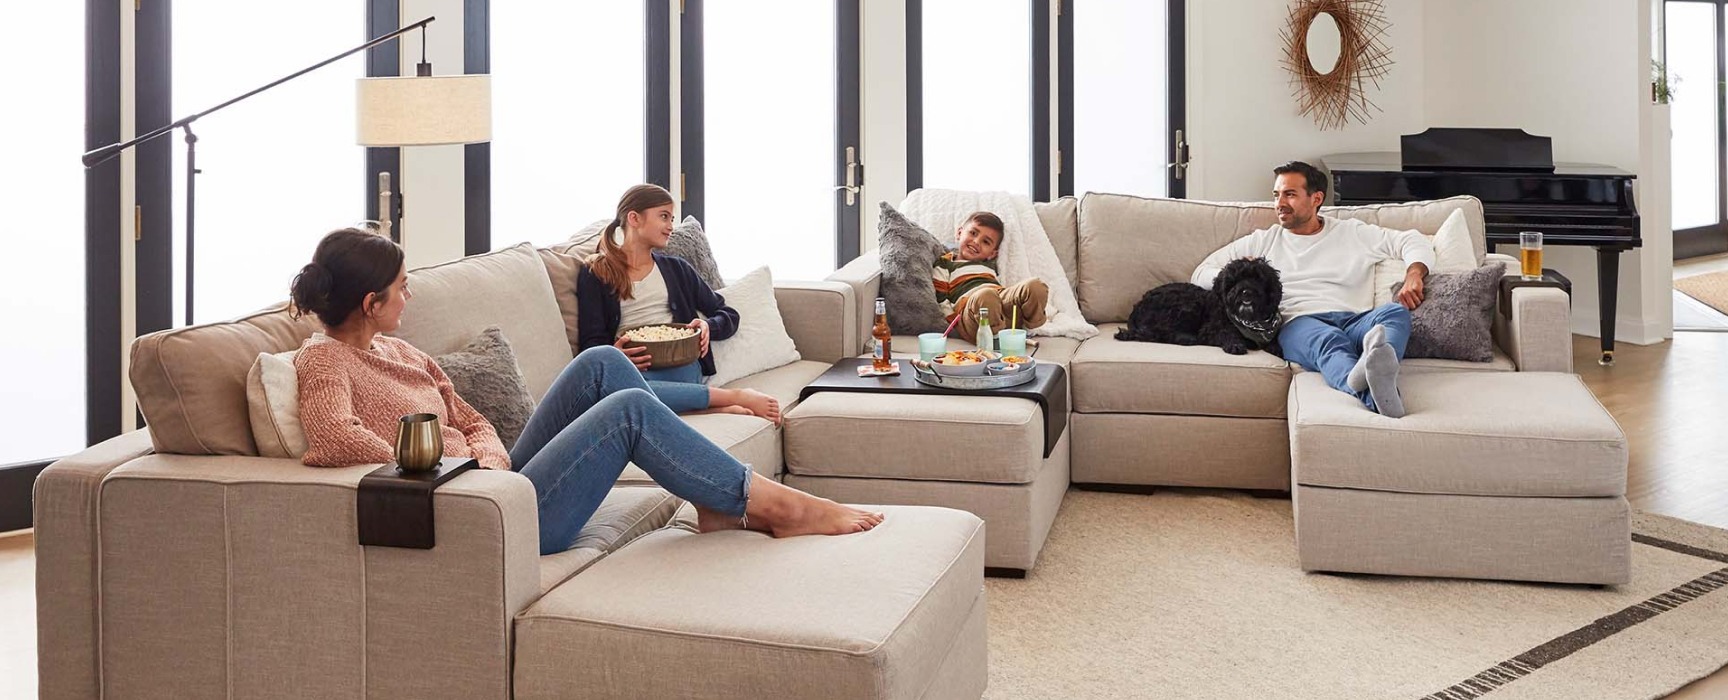 A family of four sits on a large beige couch in an open and airy living room